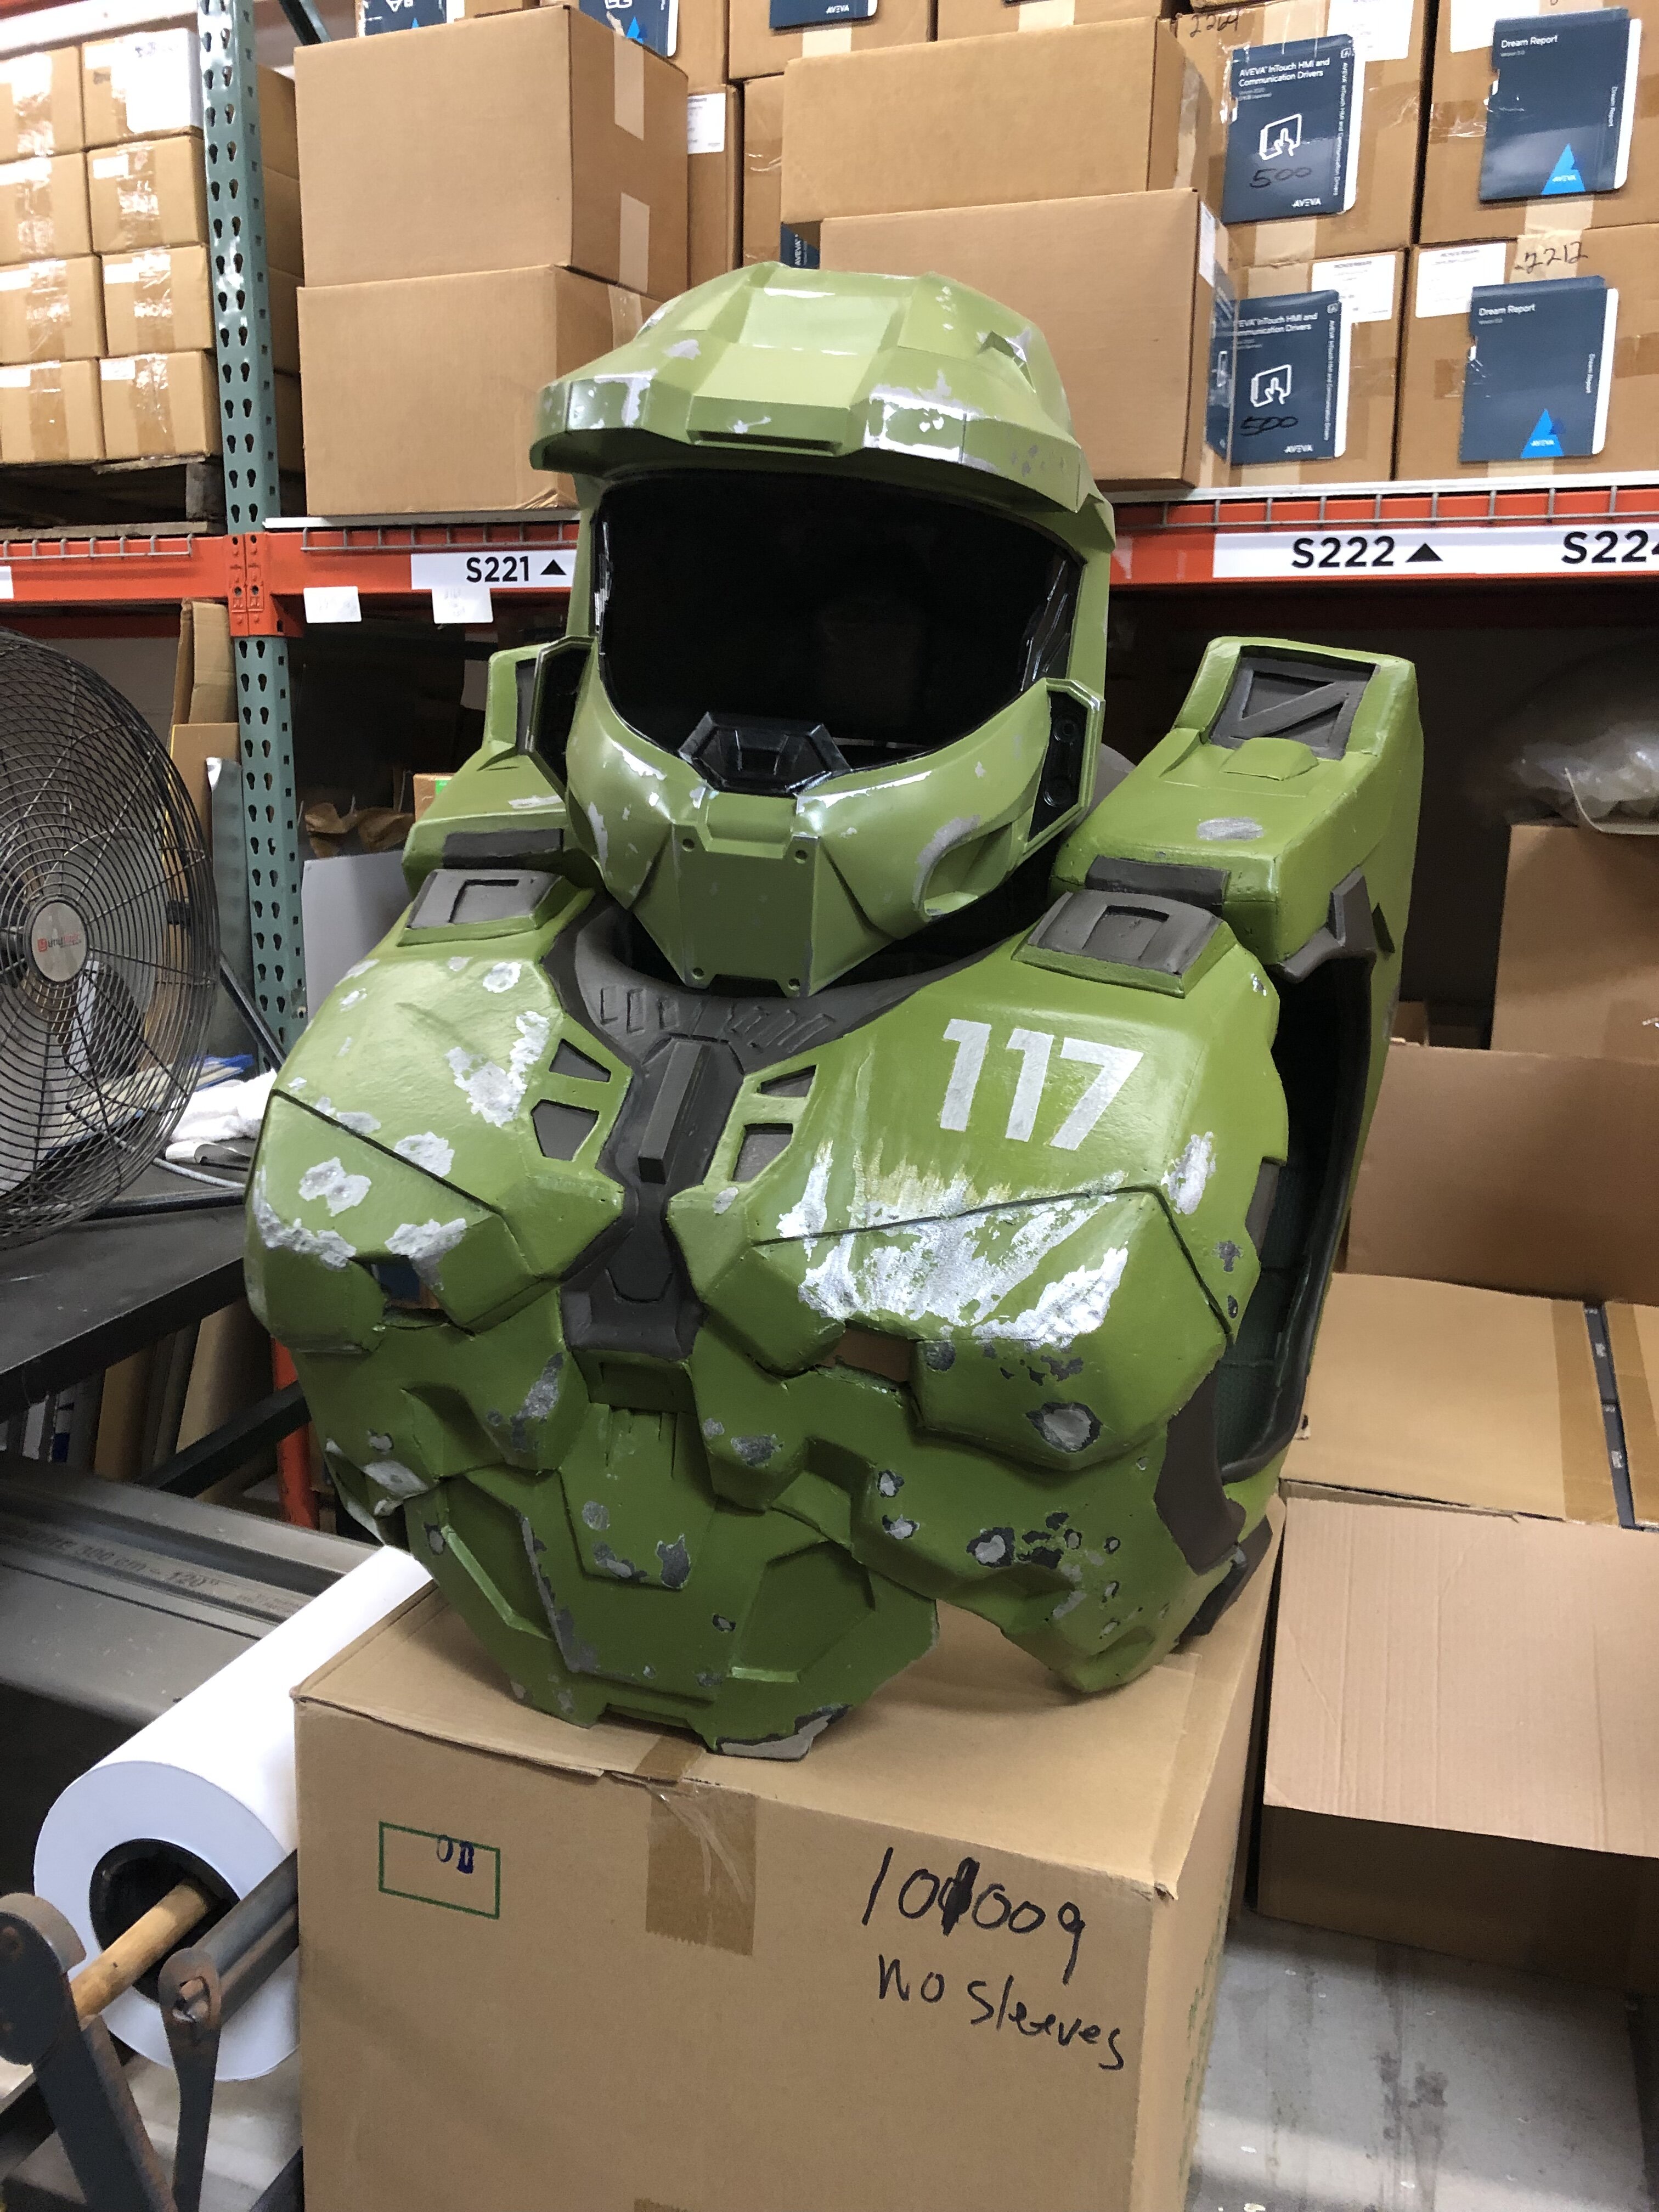 Foam - TTG Halo Infinite Chief Build | Page 4 | Halo Costume and Prop ...